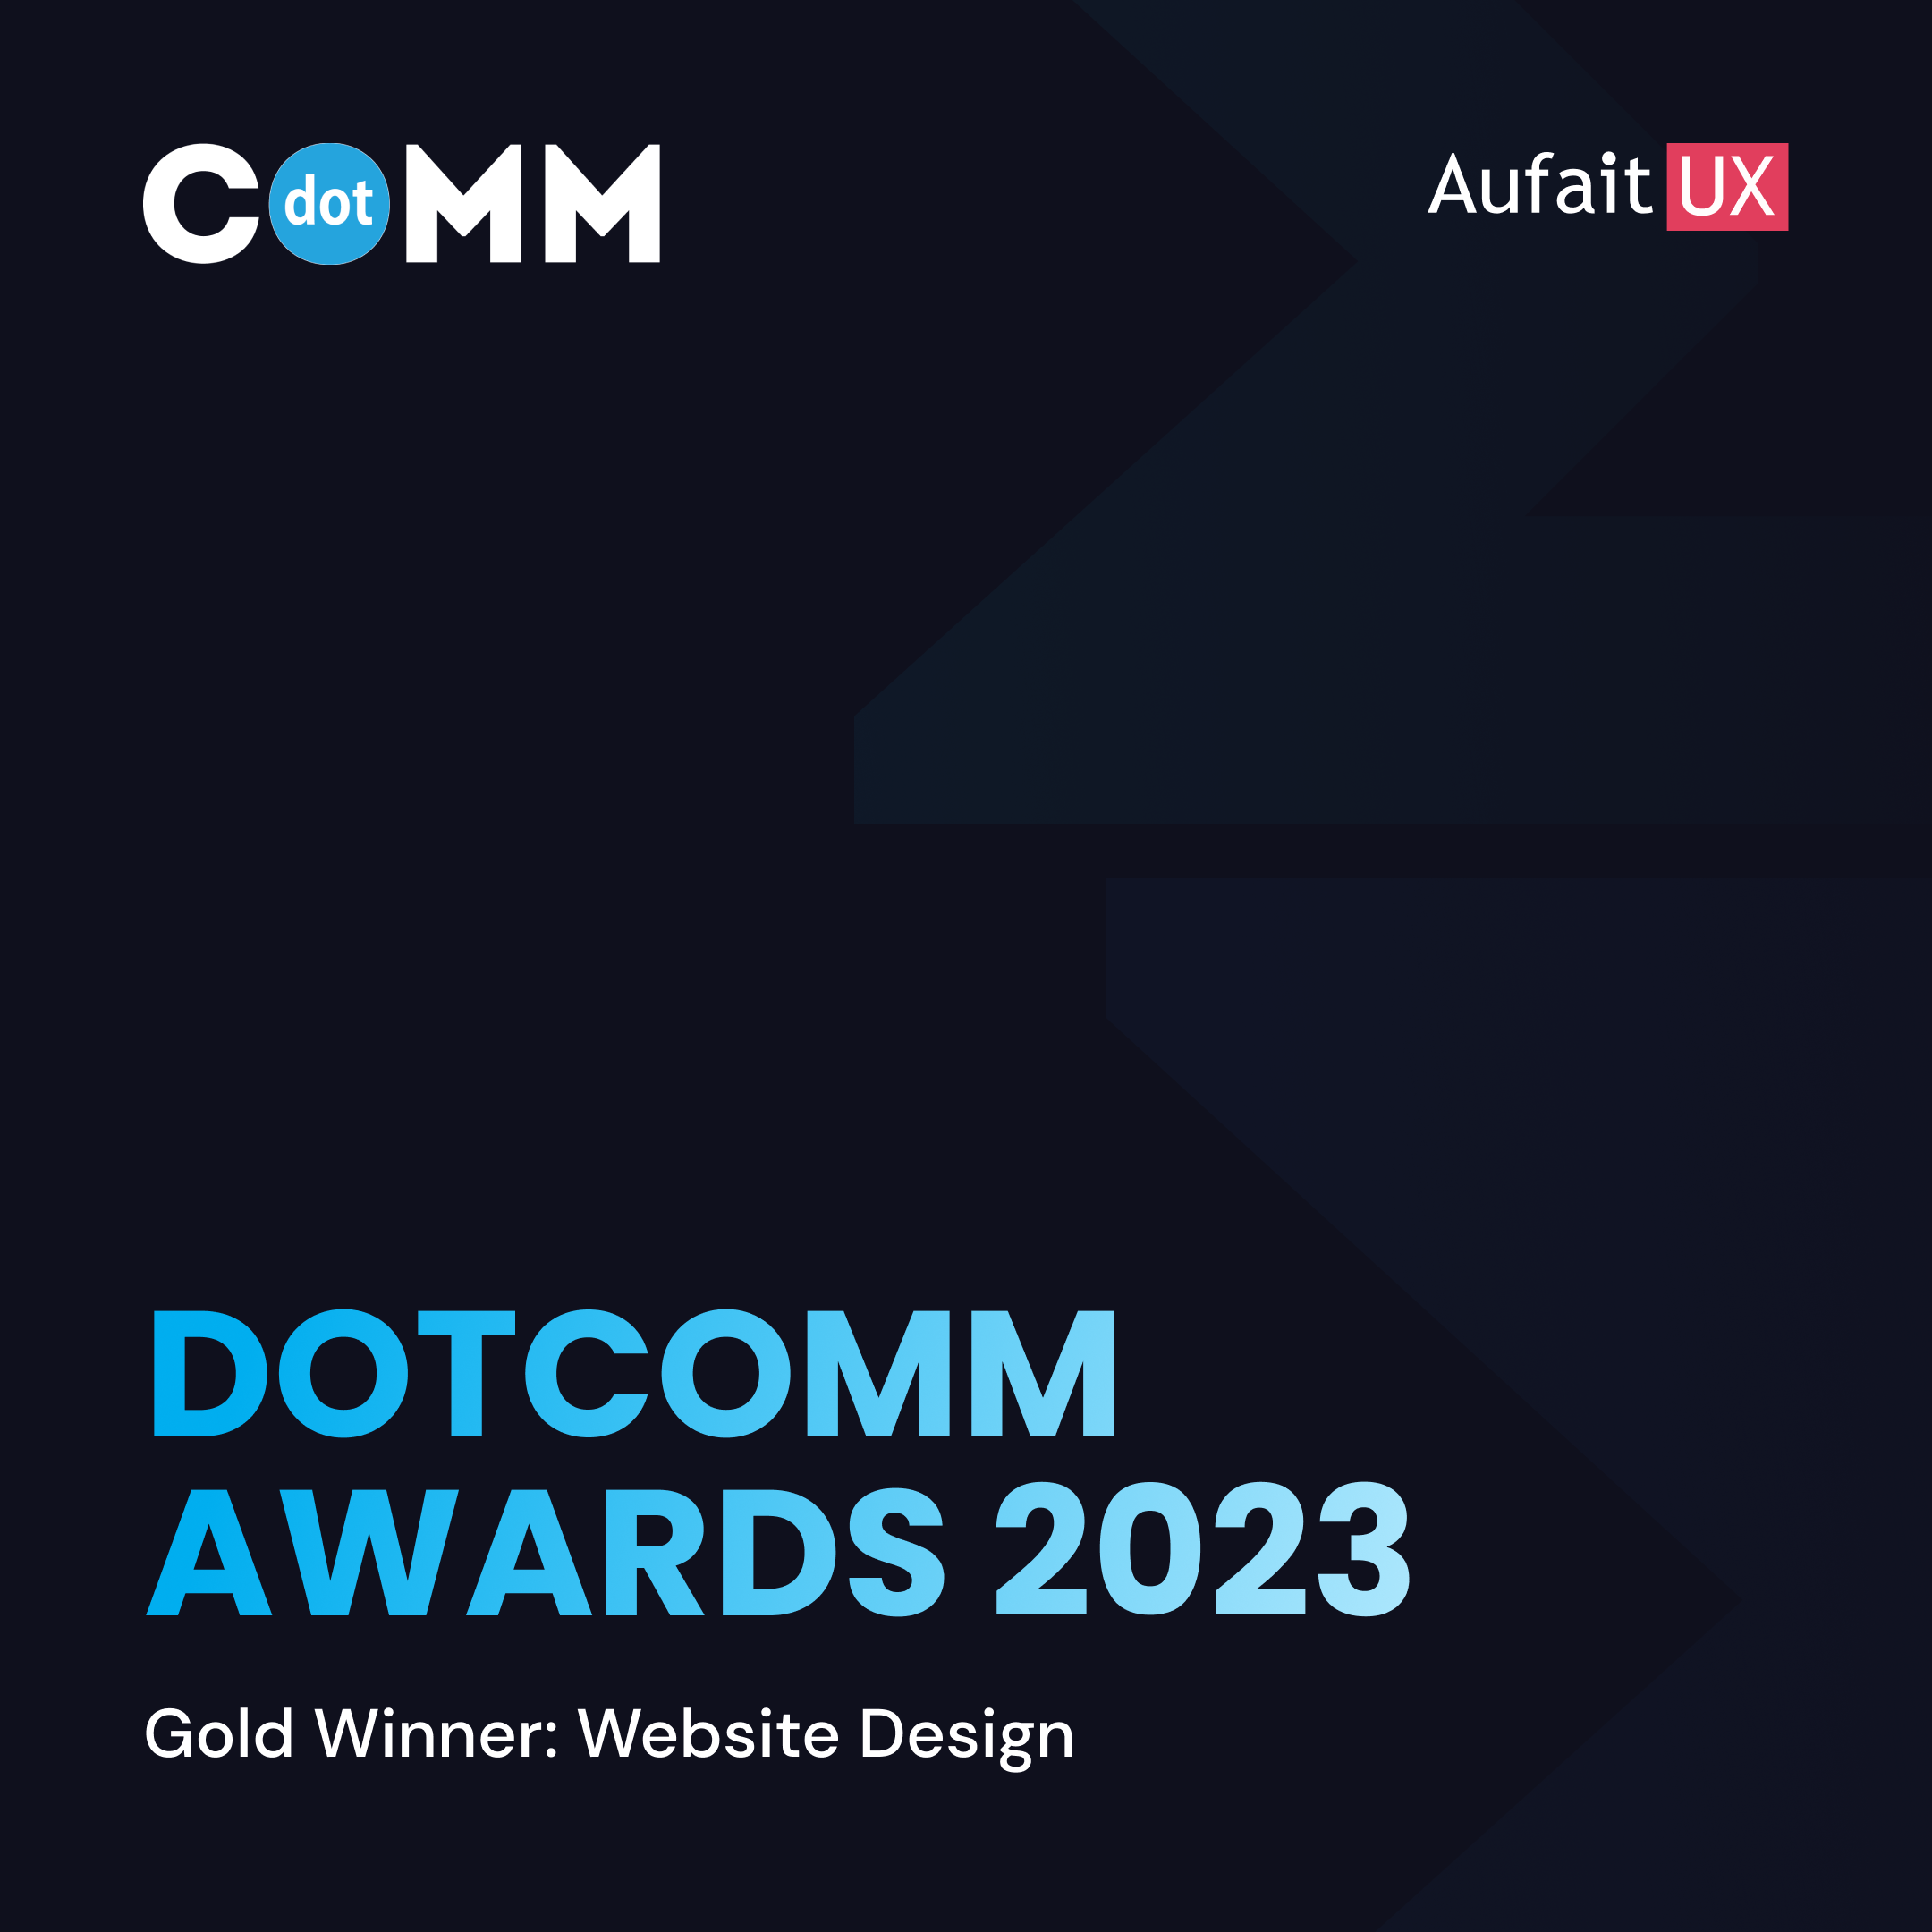 Aufait UX wins Gold at the dotComm Awards 2023